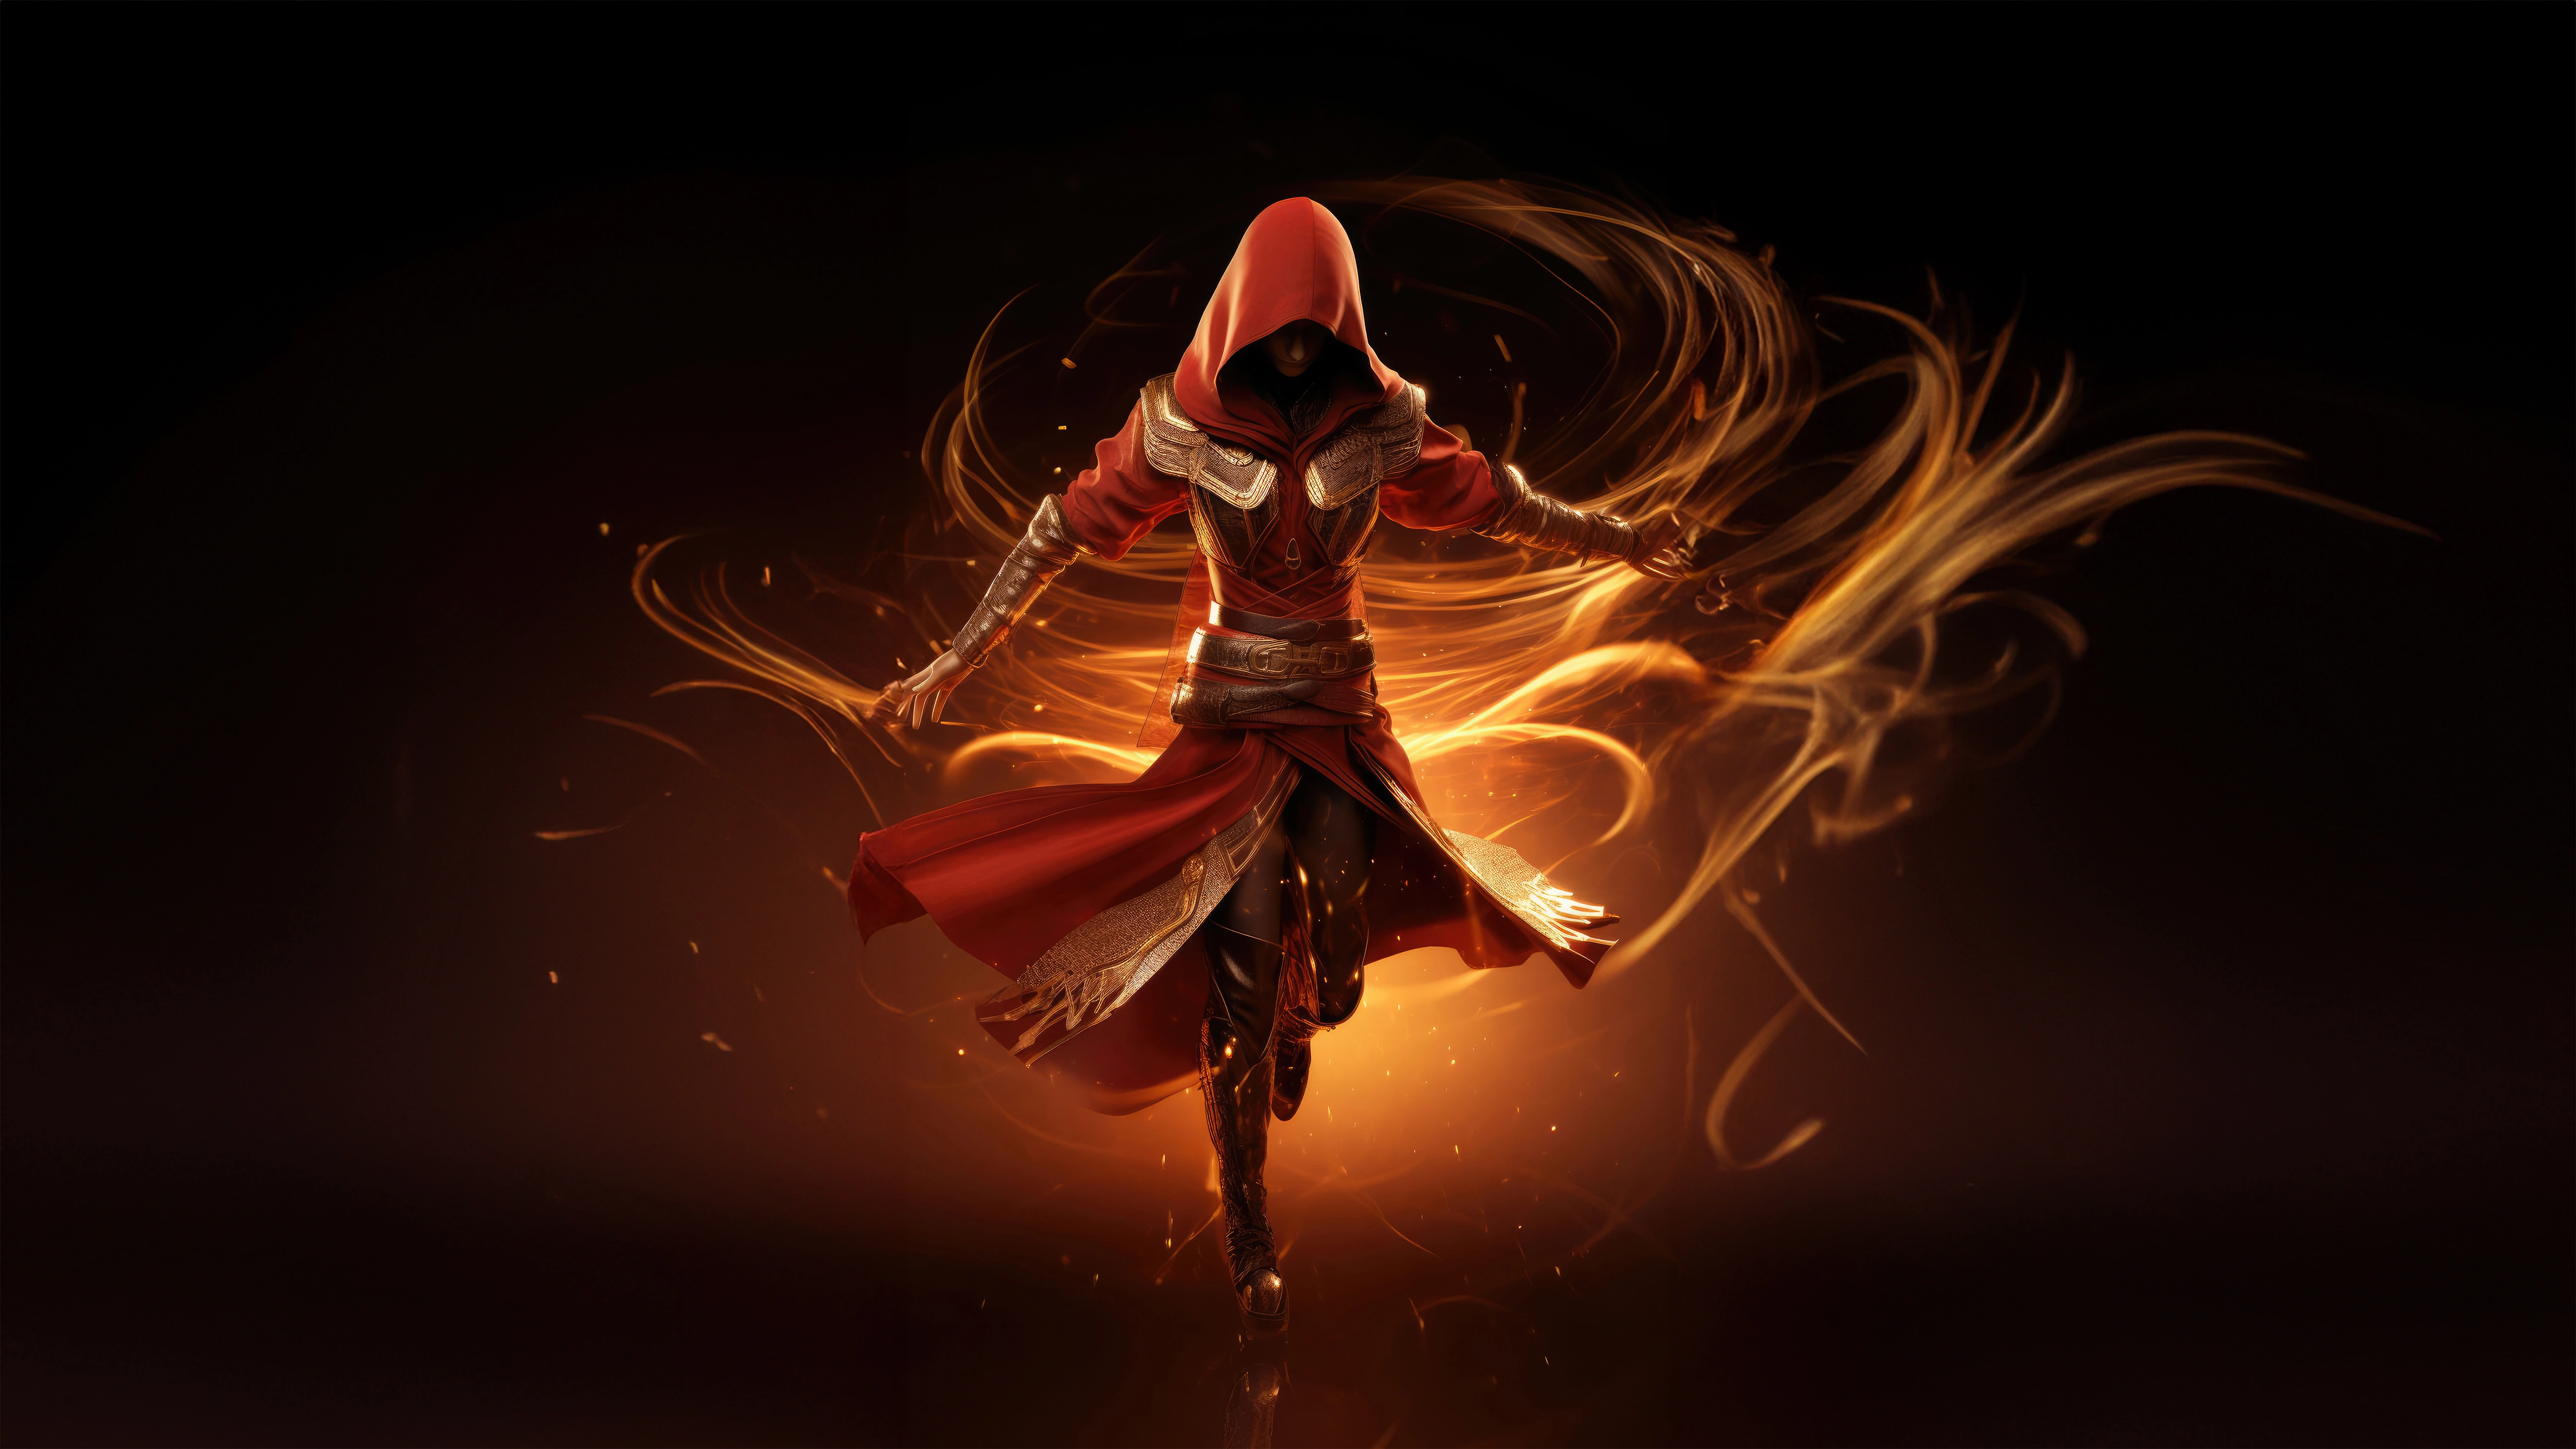 assassin girl ignites the night with flames h0.jpg